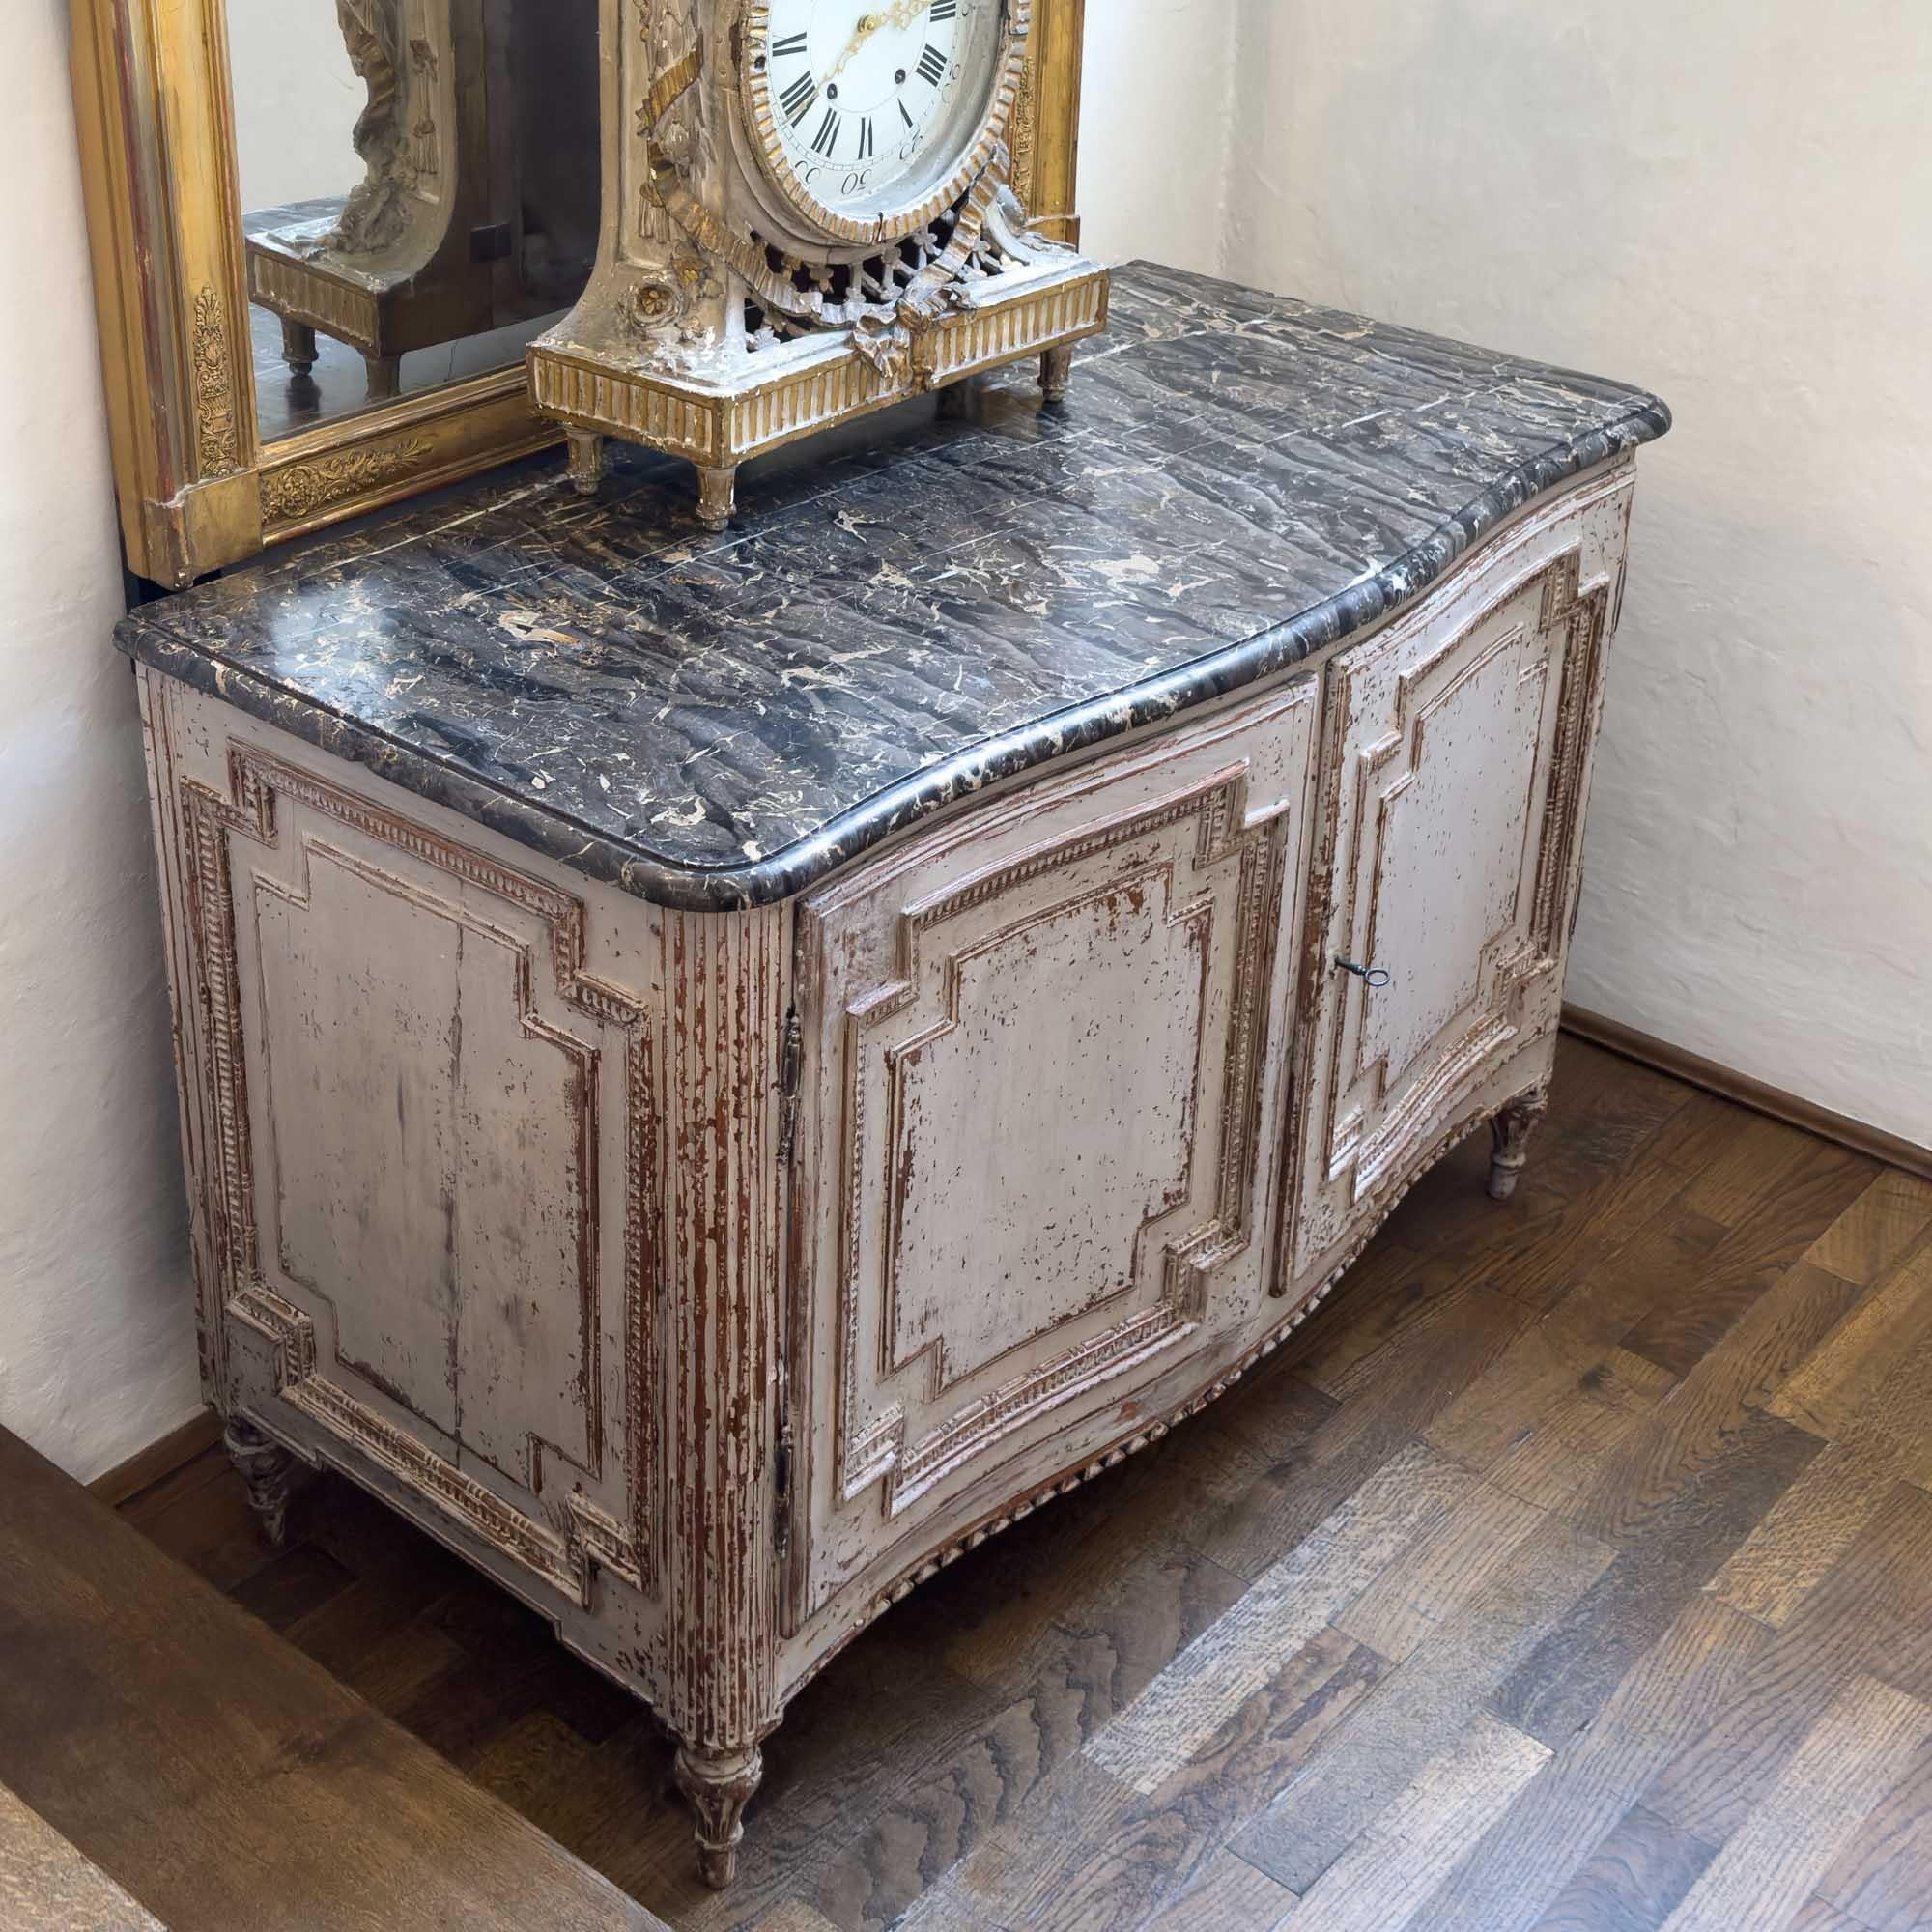 Two-door sideboard with a slightly convex front and a beautiful original marble top in a dark grey color with lighter colored veins. The corpus is coffered on all sides and has decorative friezes. The corners are rounded and fluted and merge into